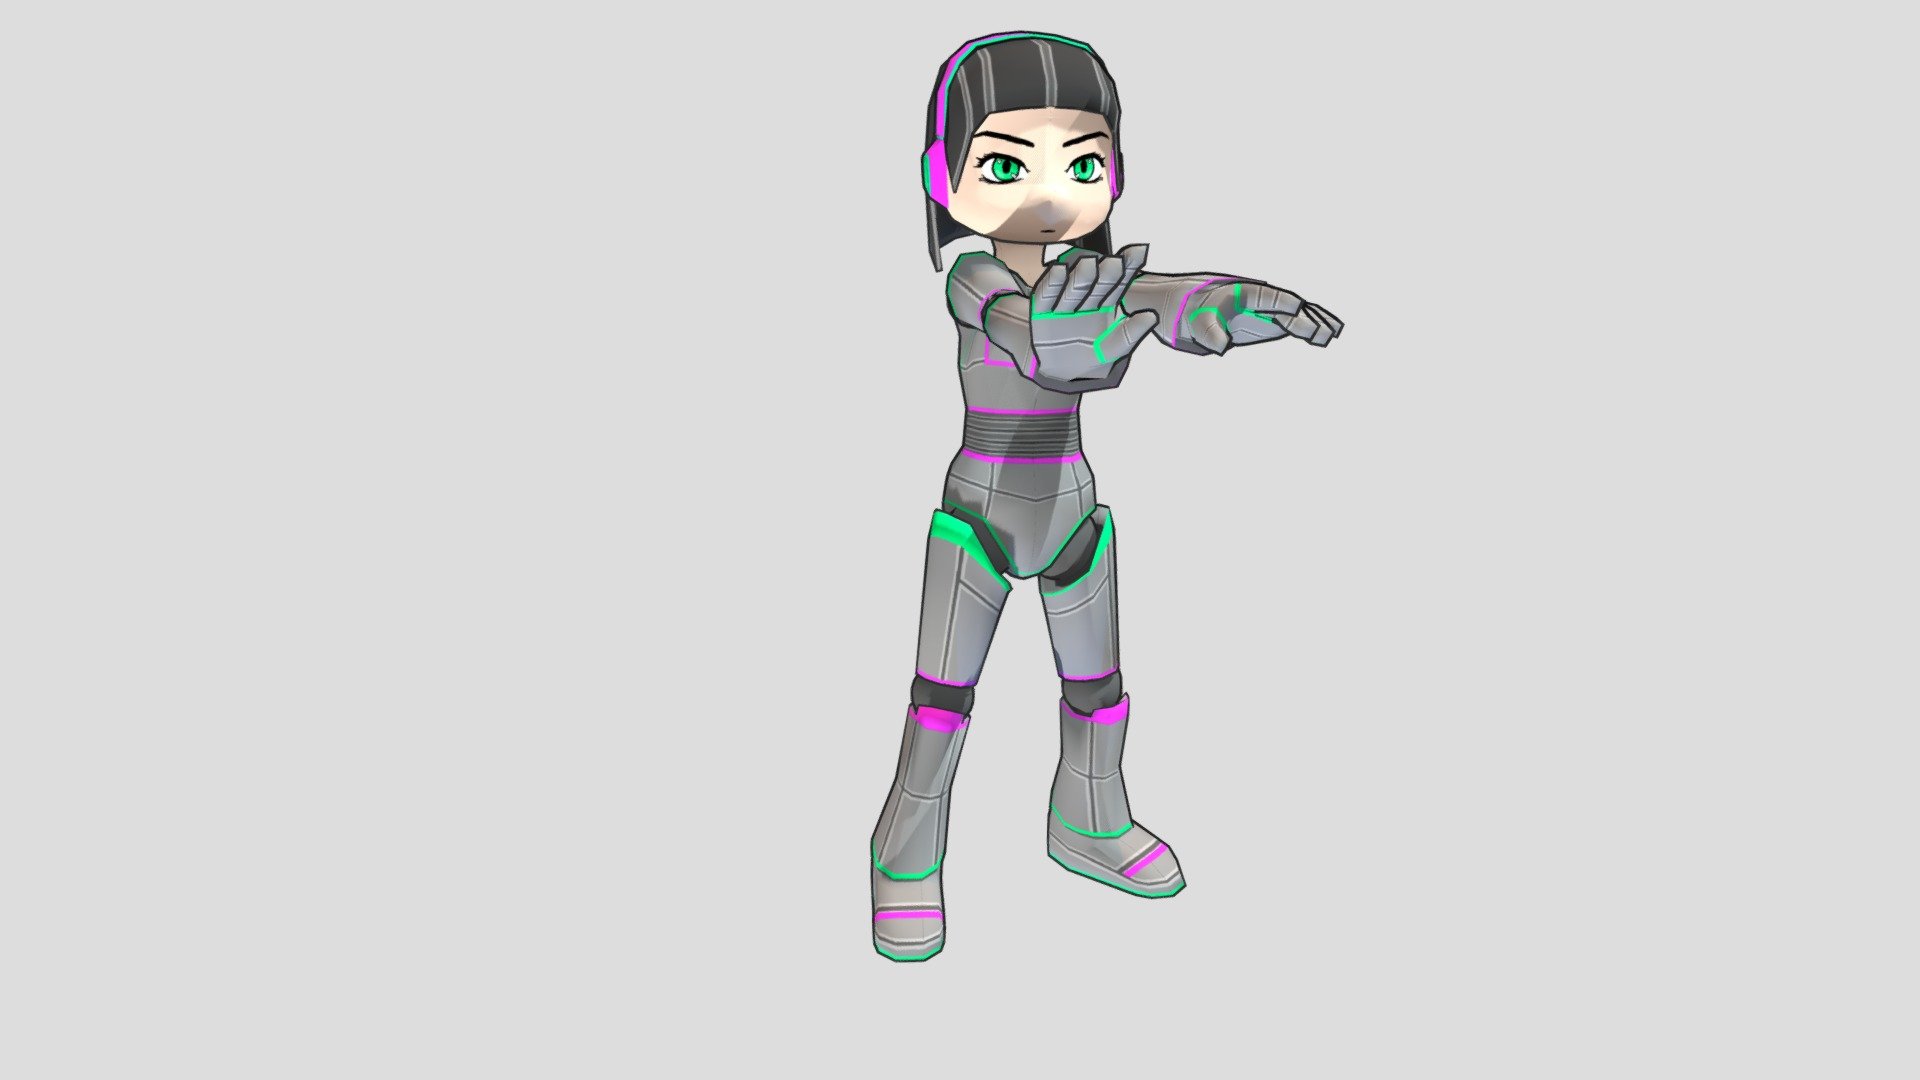 A robotic character, female model, comes with a standard skeleton mix and animation.

Want to save? Buy the complete set with male and female models through this link:
https://sketchfab.com/3d-models/the-robotic-set-a1fb5733e9804672870f18516701ad9e

(If you use it in your project, remember to put it here in the comments).
by: Moniquinha - Female Robot - 3D model by Stigia Studio (@stigiastudio) 3d model